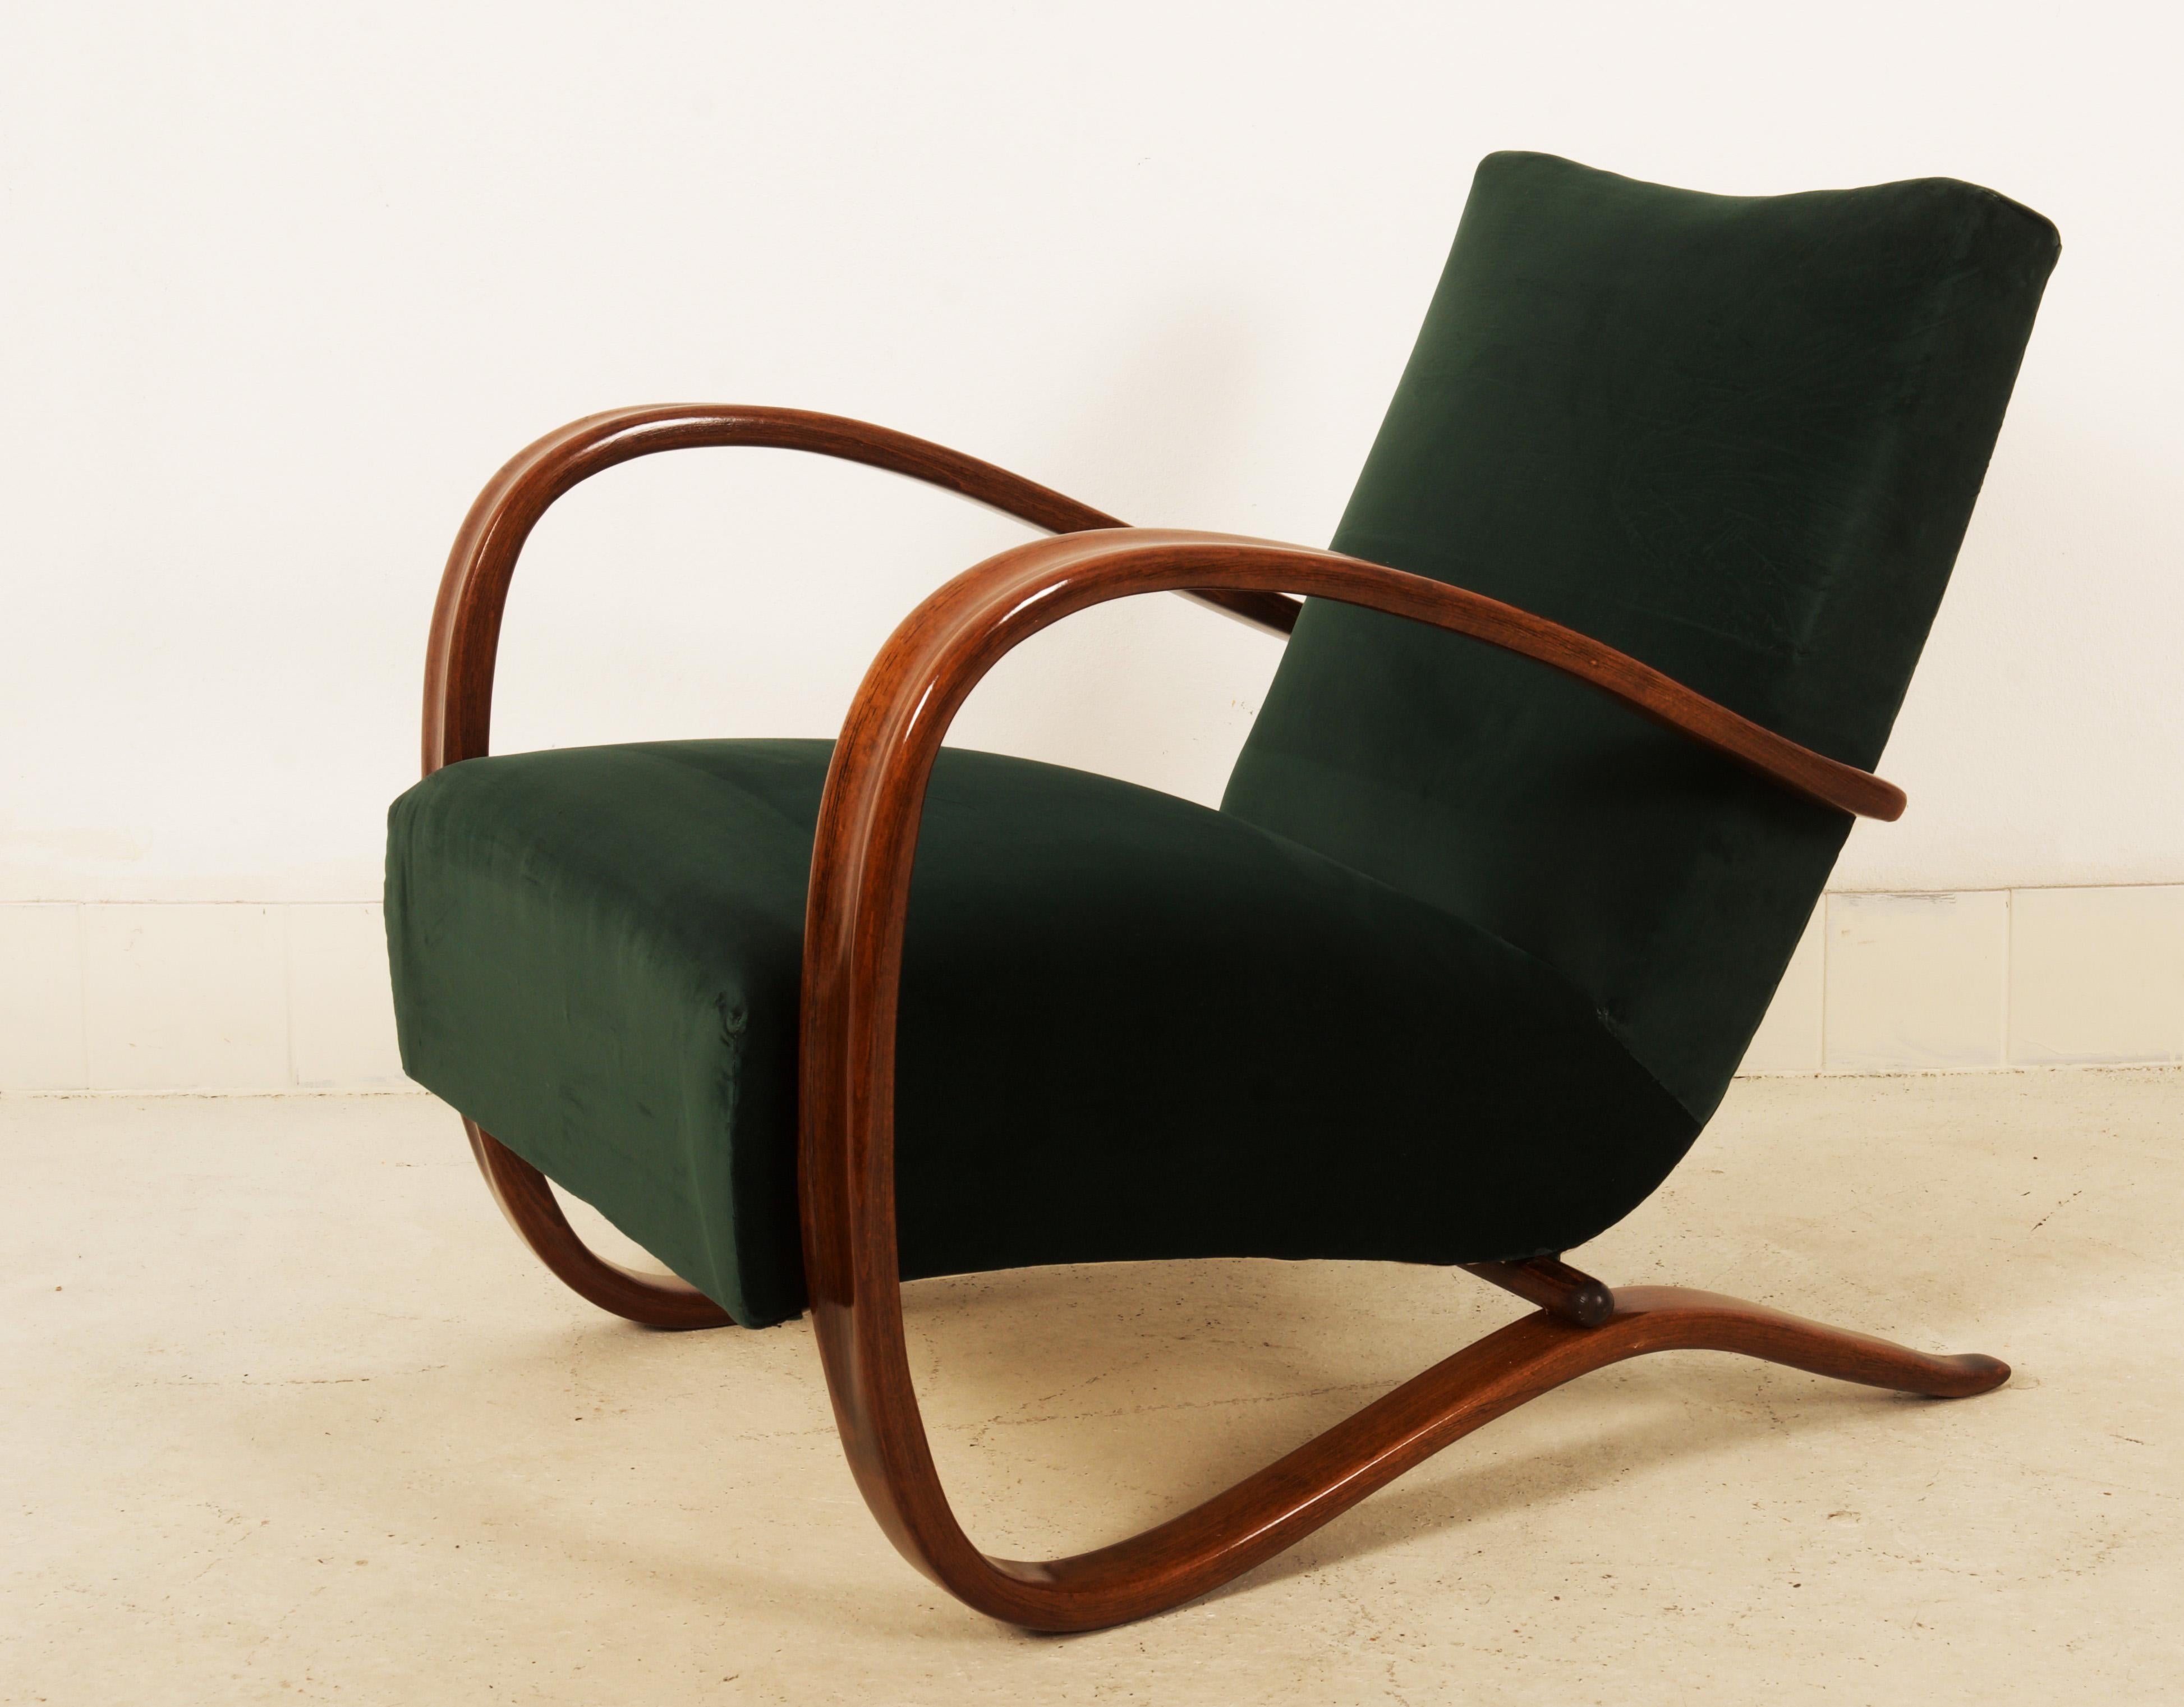 Beech bentwood walnut stained armchair made by Thonet in the 1930s.
Excellent restored with seat springs upholstered with green velvet.
Another fabric and wood finish on request possible
On request several available
Delivery time about 5-6